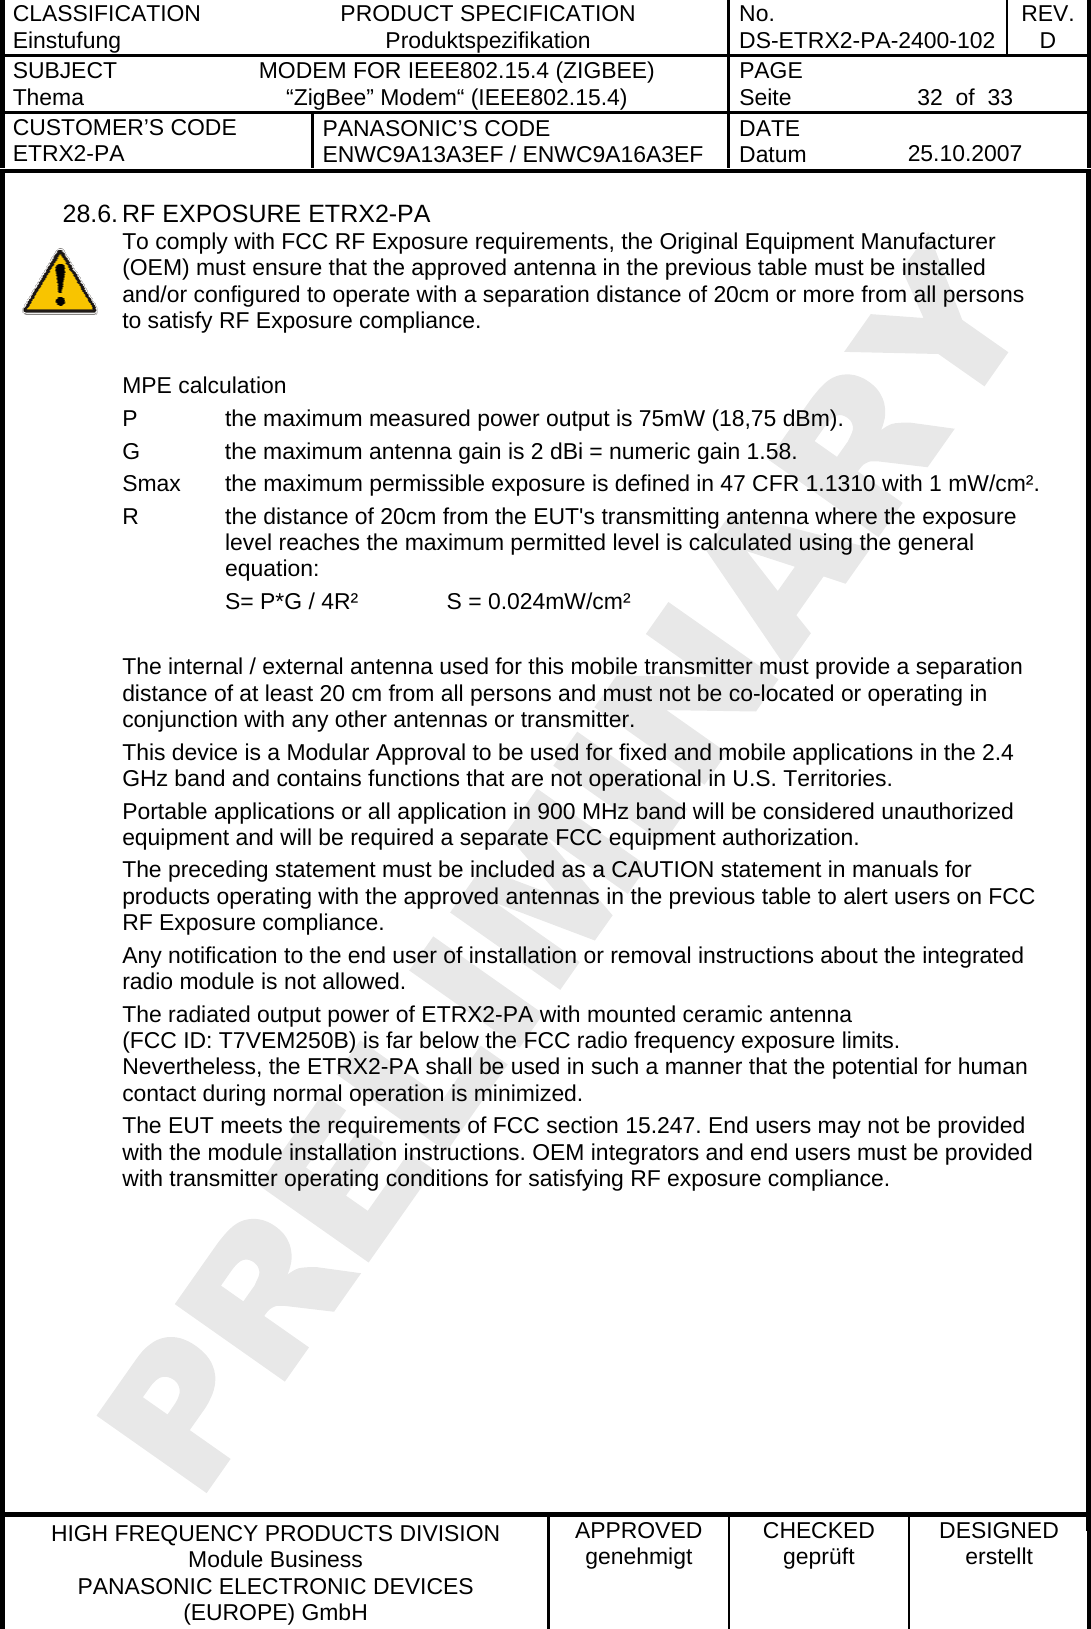 CLASSIFICATION Einstufung  PRODUCT SPECIFICATION Produktspezifikation  No. DS-ETRX2-PA-2400-102 REV.D SUBJECT Thema  MODEM FOR IEEE802.15.4 (ZIGBEE) “ZigBee” Modem“ (IEEE802.15.4)    PAGE Seite   32  of  33 CUSTOMER’S CODE ETRX2-PA  PANASONIC’S CODE ENWC9A13A3EF / ENWC9A16A3EF  DATE Datum   25.10.2007   HIGH FREQUENCY PRODUCTS DIVISION Module Business PANASONIC ELECTRONIC DEVICES  (EUROPE) GmbH APPROVED genehmigt  CHECKED geprüft  DESIGNED erstellt 28.6. RF EXPOSURE ETRX2-PA To comply with FCC RF Exposure requirements, the Original Equipment Manufacturer (OEM) must ensure that the approved antenna in the previous table must be installed and/or configured to operate with a separation distance of 20cm or more from all persons to satisfy RF Exposure compliance.  MPE calculation P    the maximum measured power output is 75mW (18,75 dBm). G    the maximum antenna gain is 2 dBi = numeric gain 1.58.  Smax  the maximum permissible exposure is defined in 47 CFR 1.1310 with 1 mW/cm². R  the distance of 20cm from the EUT&apos;s transmitting antenna where the exposure  level reaches the maximum permitted level is calculated using the general equation: S= P*G / 4R²    S = 0.024mW/cm²  The internal / external antenna used for this mobile transmitter must provide a separation distance of at least 20 cm from all persons and must not be co-located or operating in conjunction with any other antennas or transmitter. This device is a Modular Approval to be used for fixed and mobile applications in the 2.4 GHz band and contains functions that are not operational in U.S. Territories. Portable applications or all application in 900 MHz band will be considered unauthorized equipment and will be required a separate FCC equipment authorization. The preceding statement must be included as a CAUTION statement in manuals for products operating with the approved antennas in the previous table to alert users on FCC RF Exposure compliance. Any notification to the end user of installation or removal instructions about the integrated radio module is not allowed. The radiated output power of ETRX2-PA with mounted ceramic antenna (FCC ID: T7VEM250B) is far below the FCC radio frequency exposure limits. Nevertheless, the ETRX2-PA shall be used in such a manner that the potential for human contact during normal operation is minimized. The EUT meets the requirements of FCC section 15.247. End users may not be provided with the module installation instructions. OEM integrators and end users must be provided with transmitter operating conditions for satisfying RF exposure compliance.   